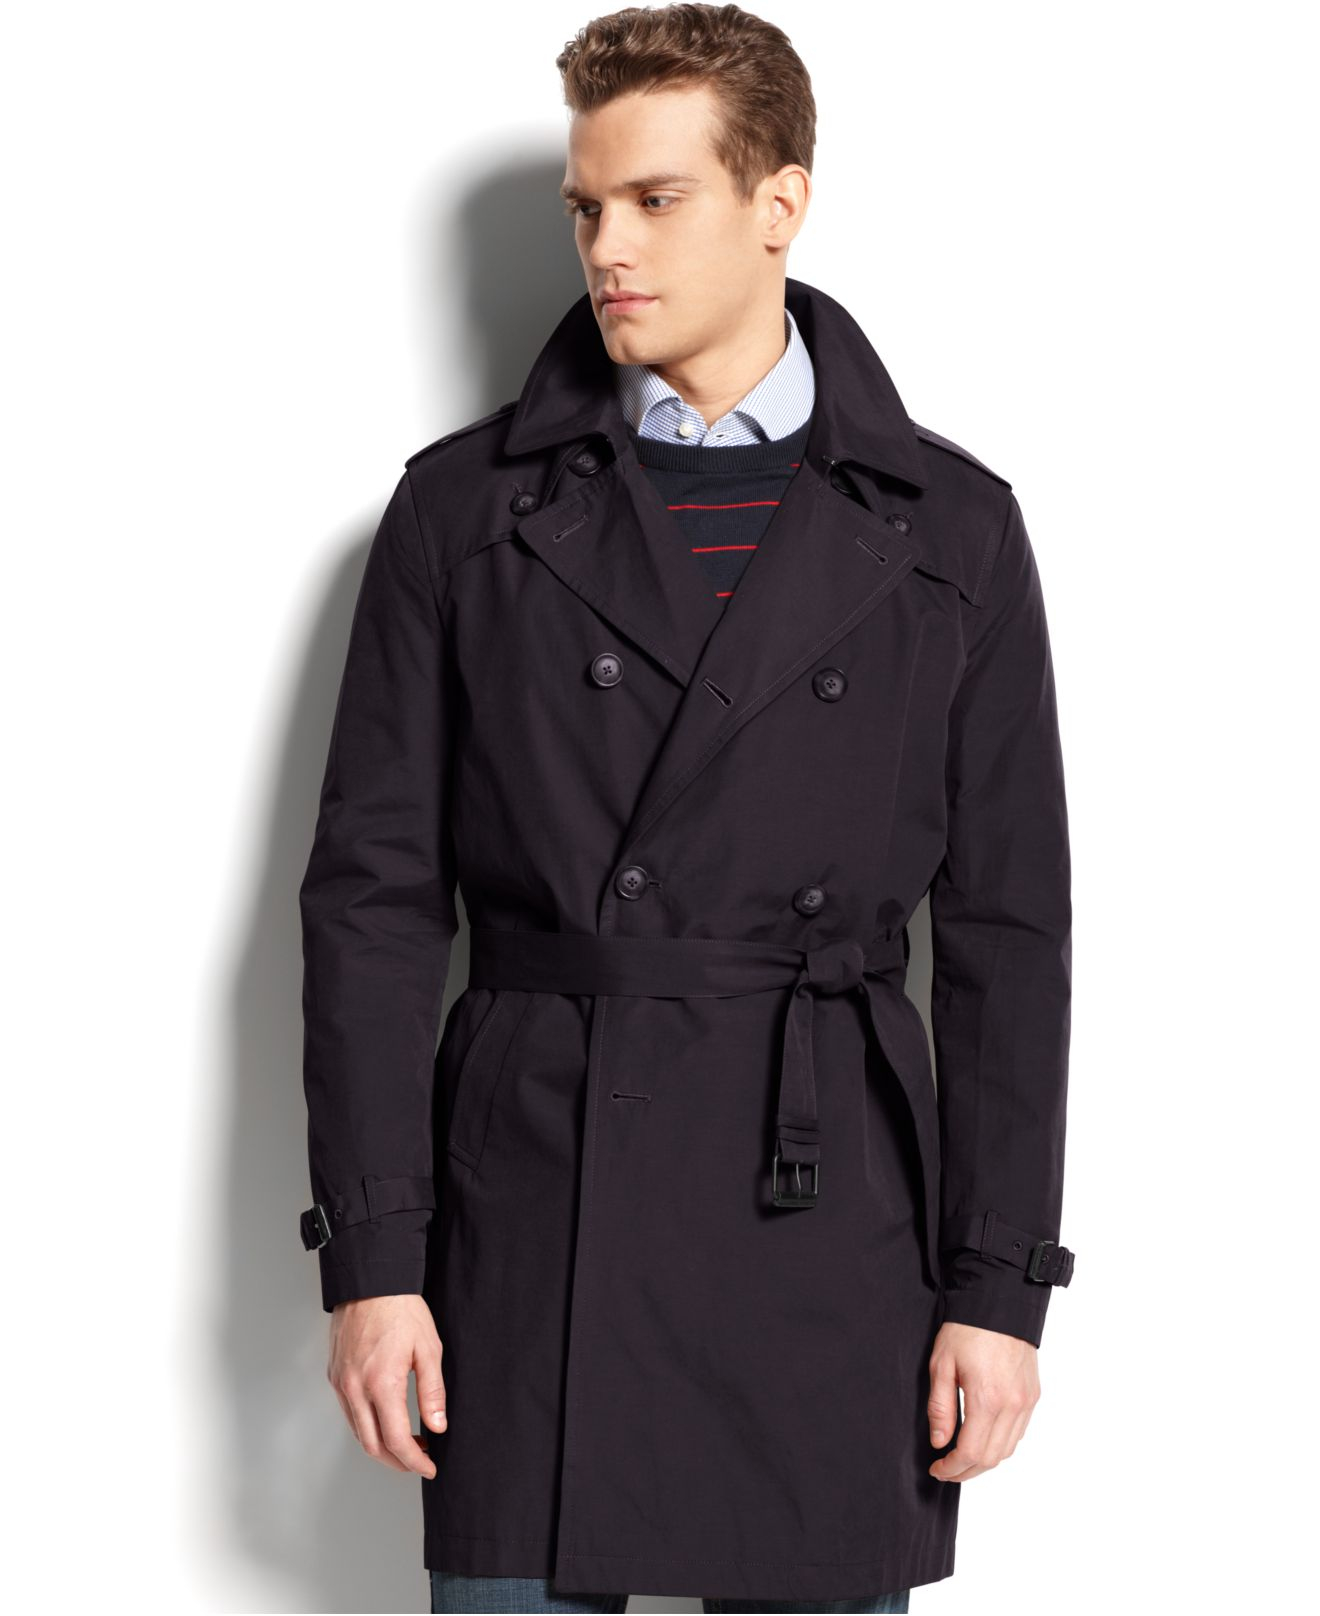 Tommy Hilfiger Double-breasted Belted Trench Coat in Black for Men - Lyst